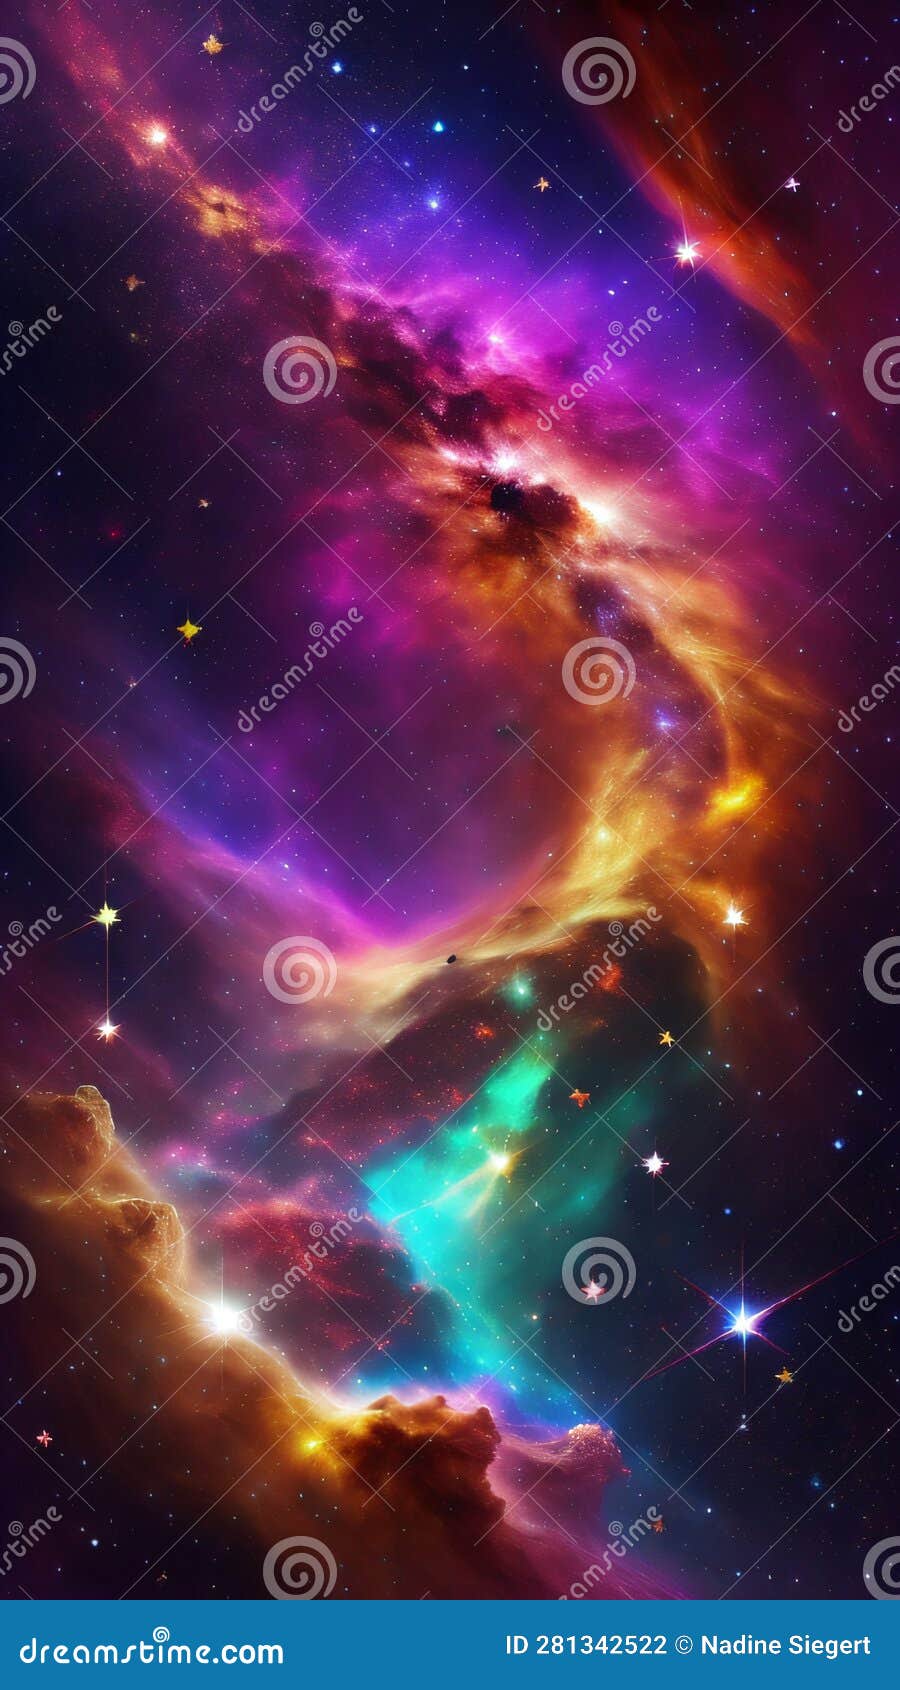 700+] Outer Space Wallpapers | Wallpapers.com